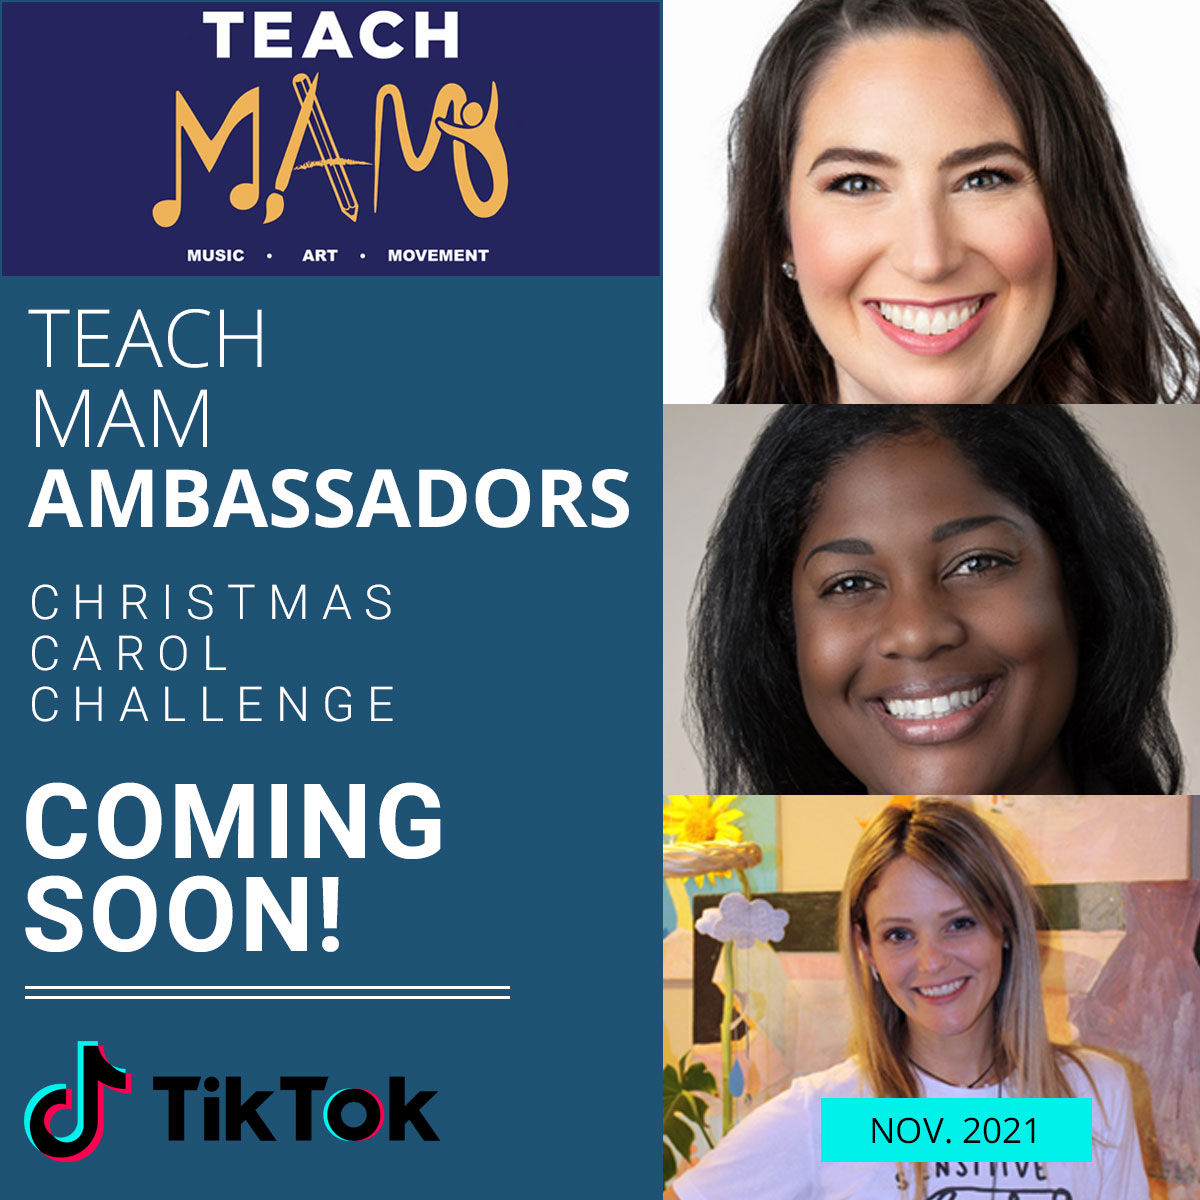 Teach MAM – Ambassadors Plan for the Upcoming Year